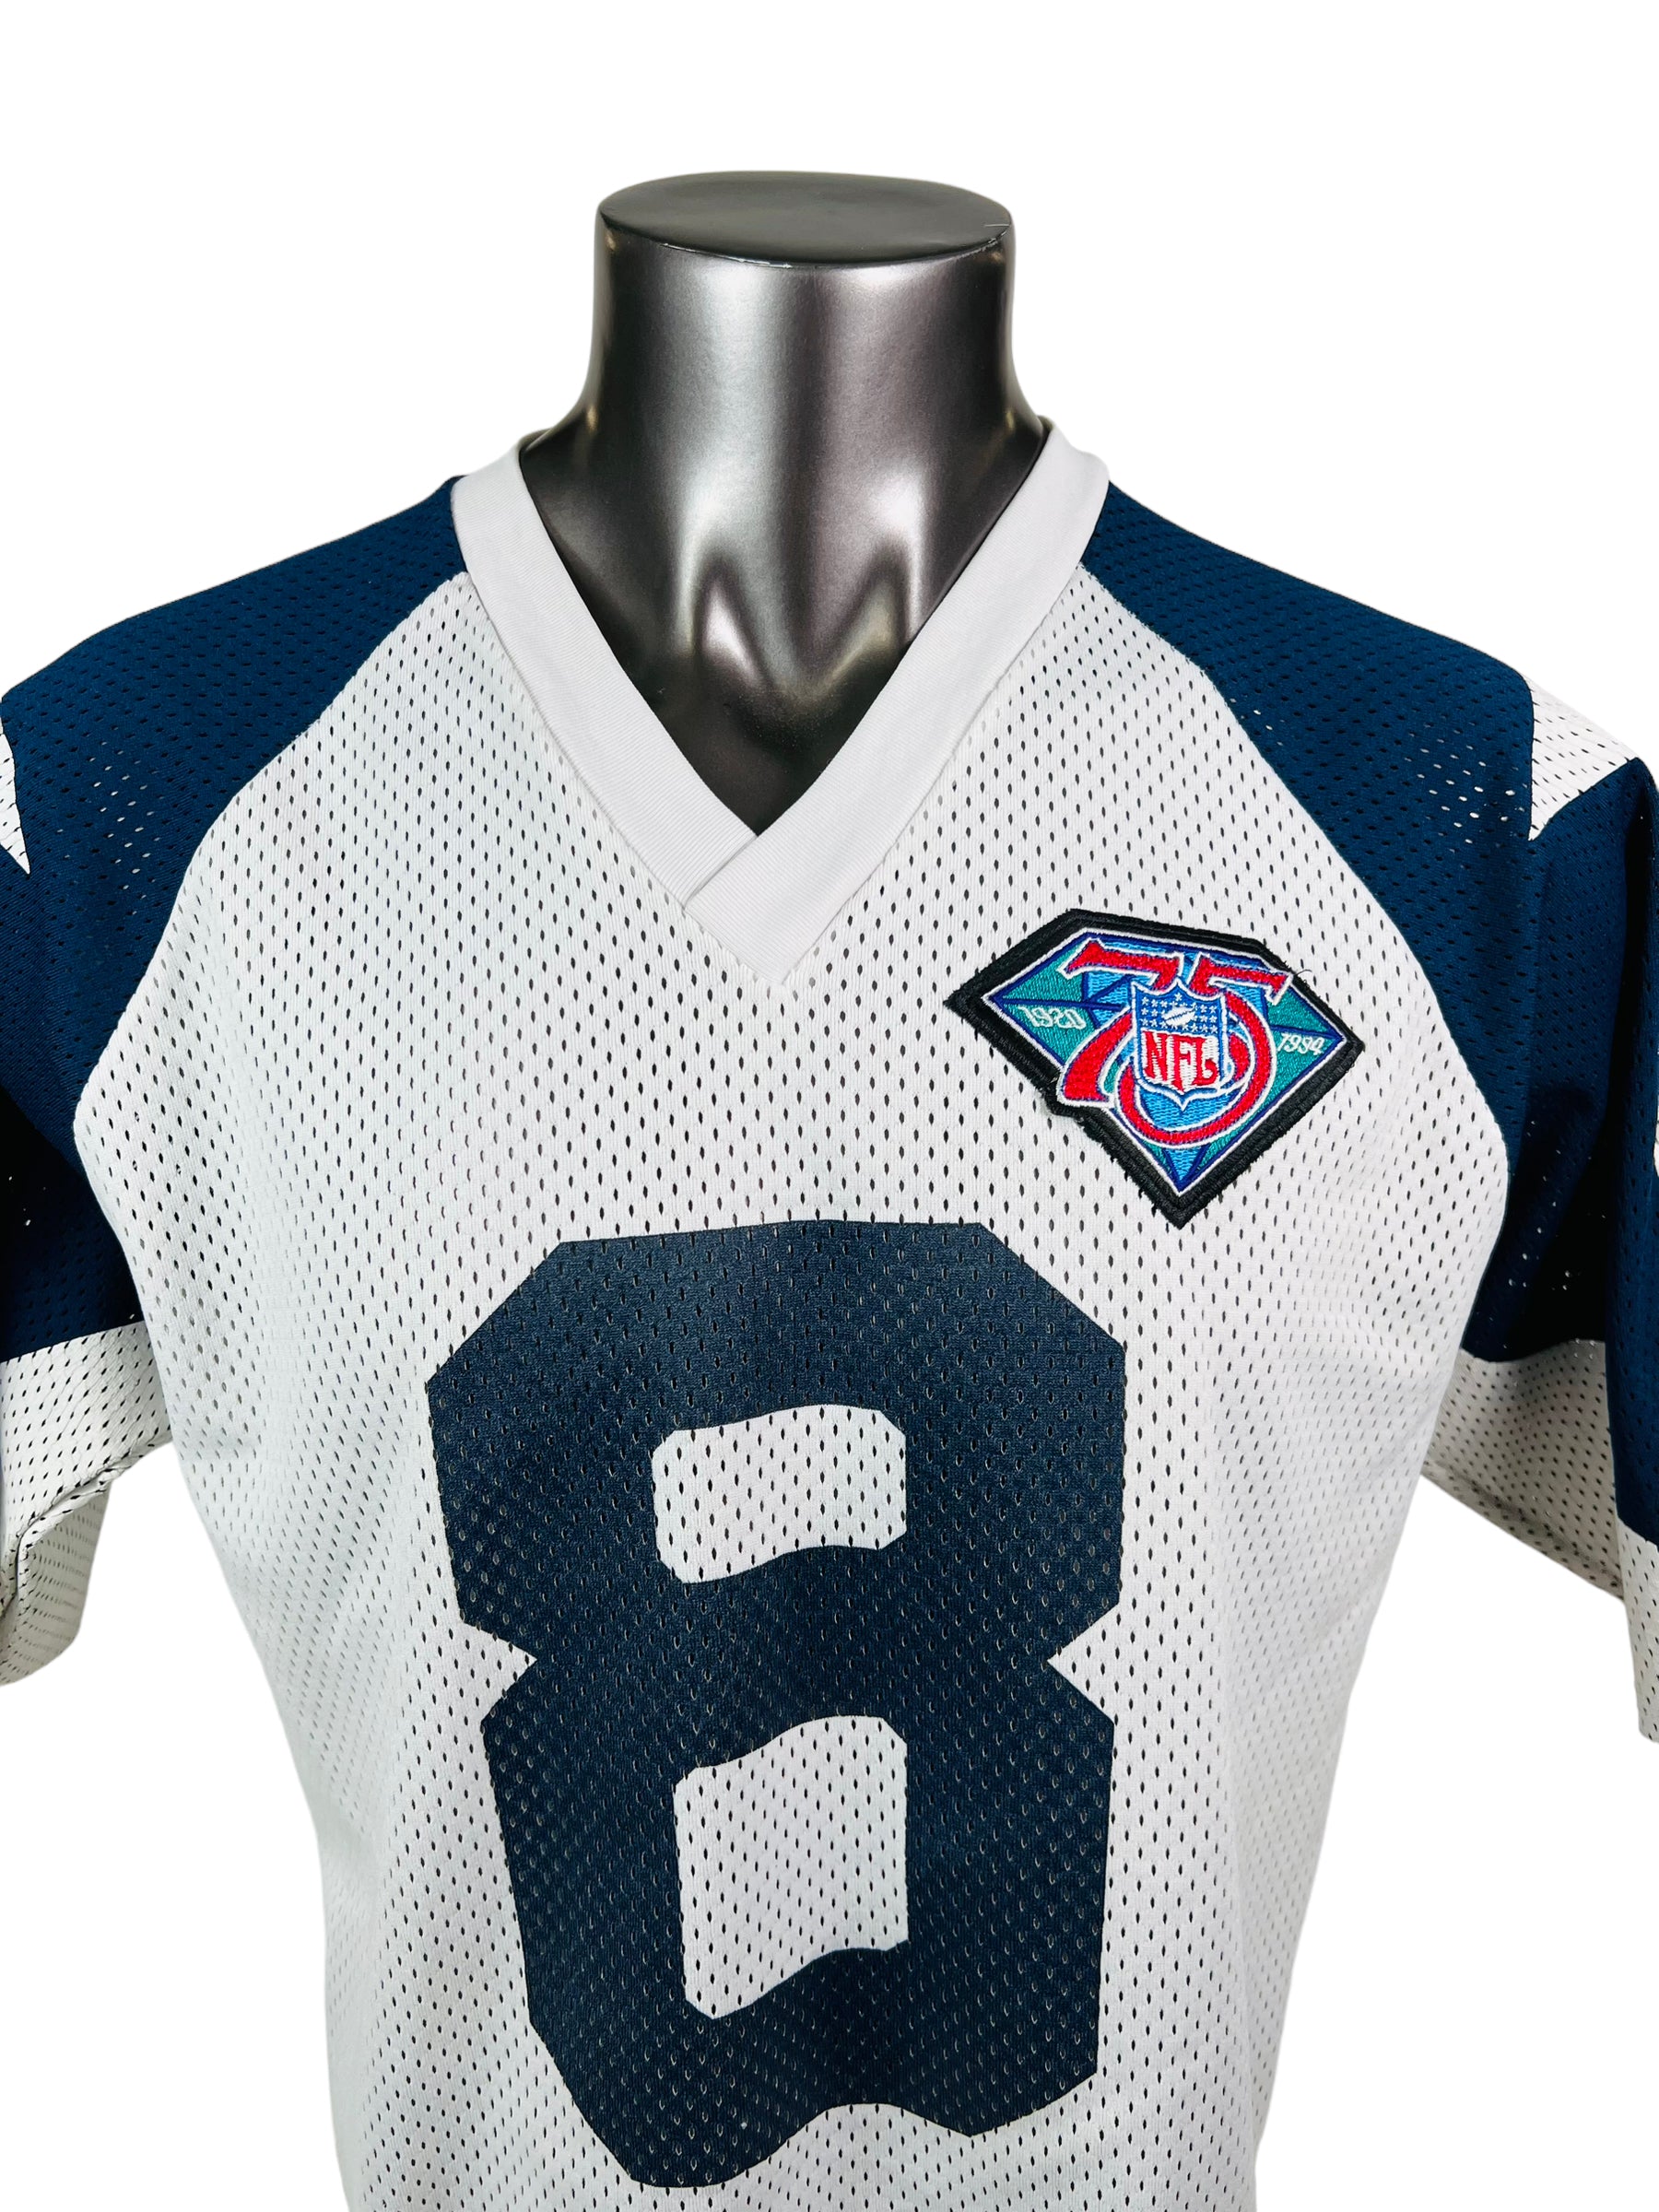 Troy Aikman cowboys jersey NFL 75th anniversary | SidelineSwap